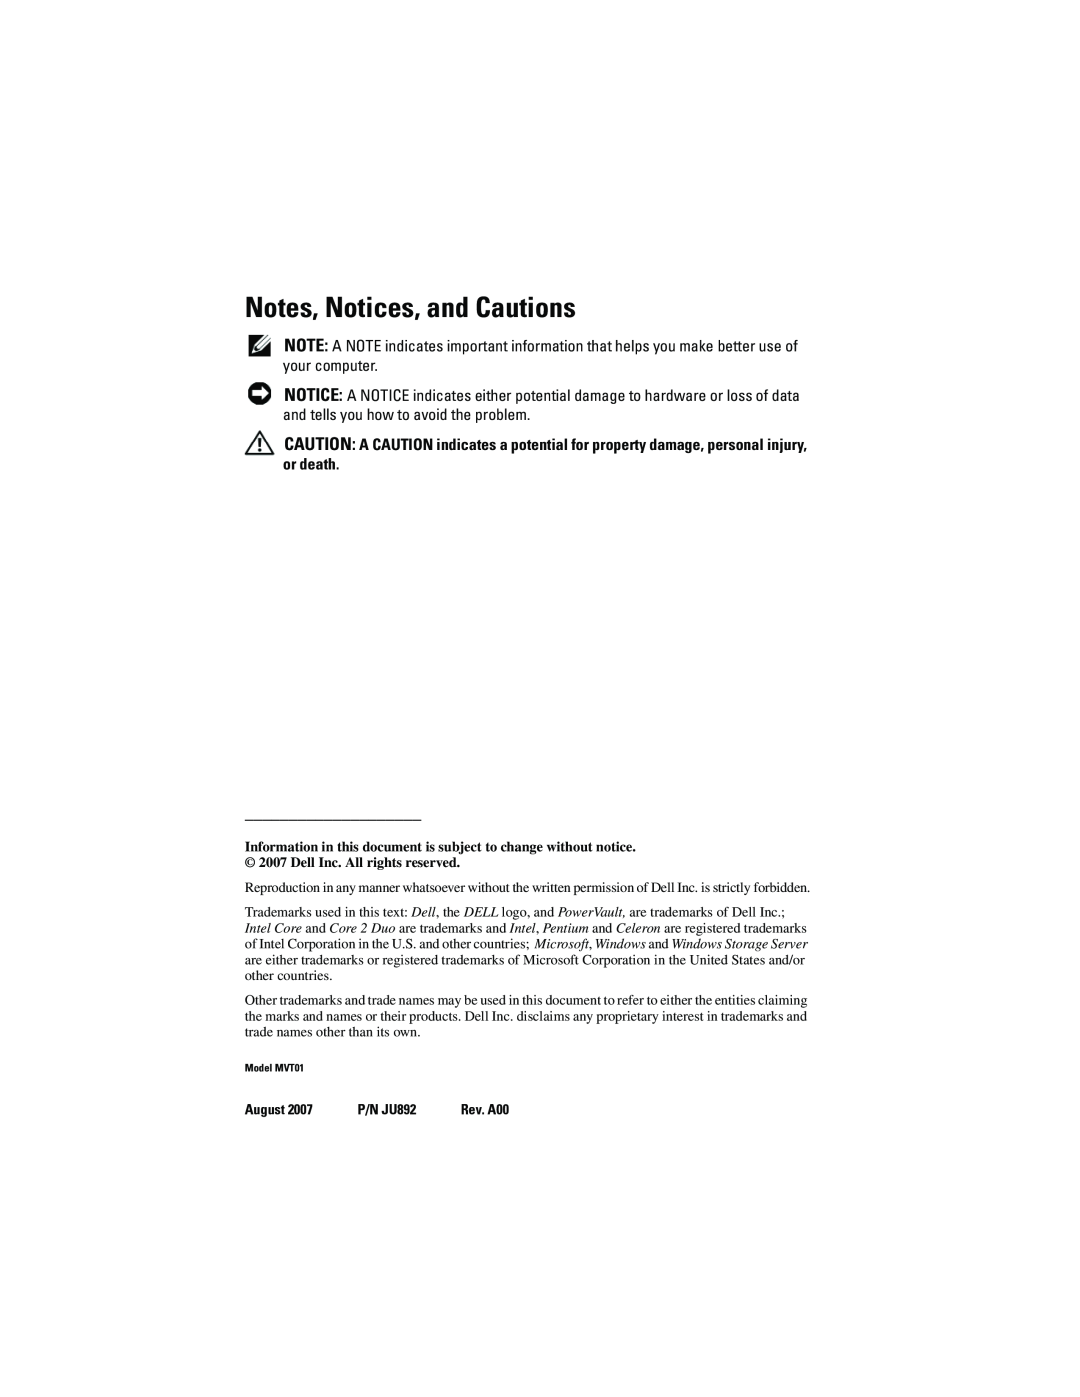 Dell MVT01, JU892 manual Notes, Notices, and Cautions 